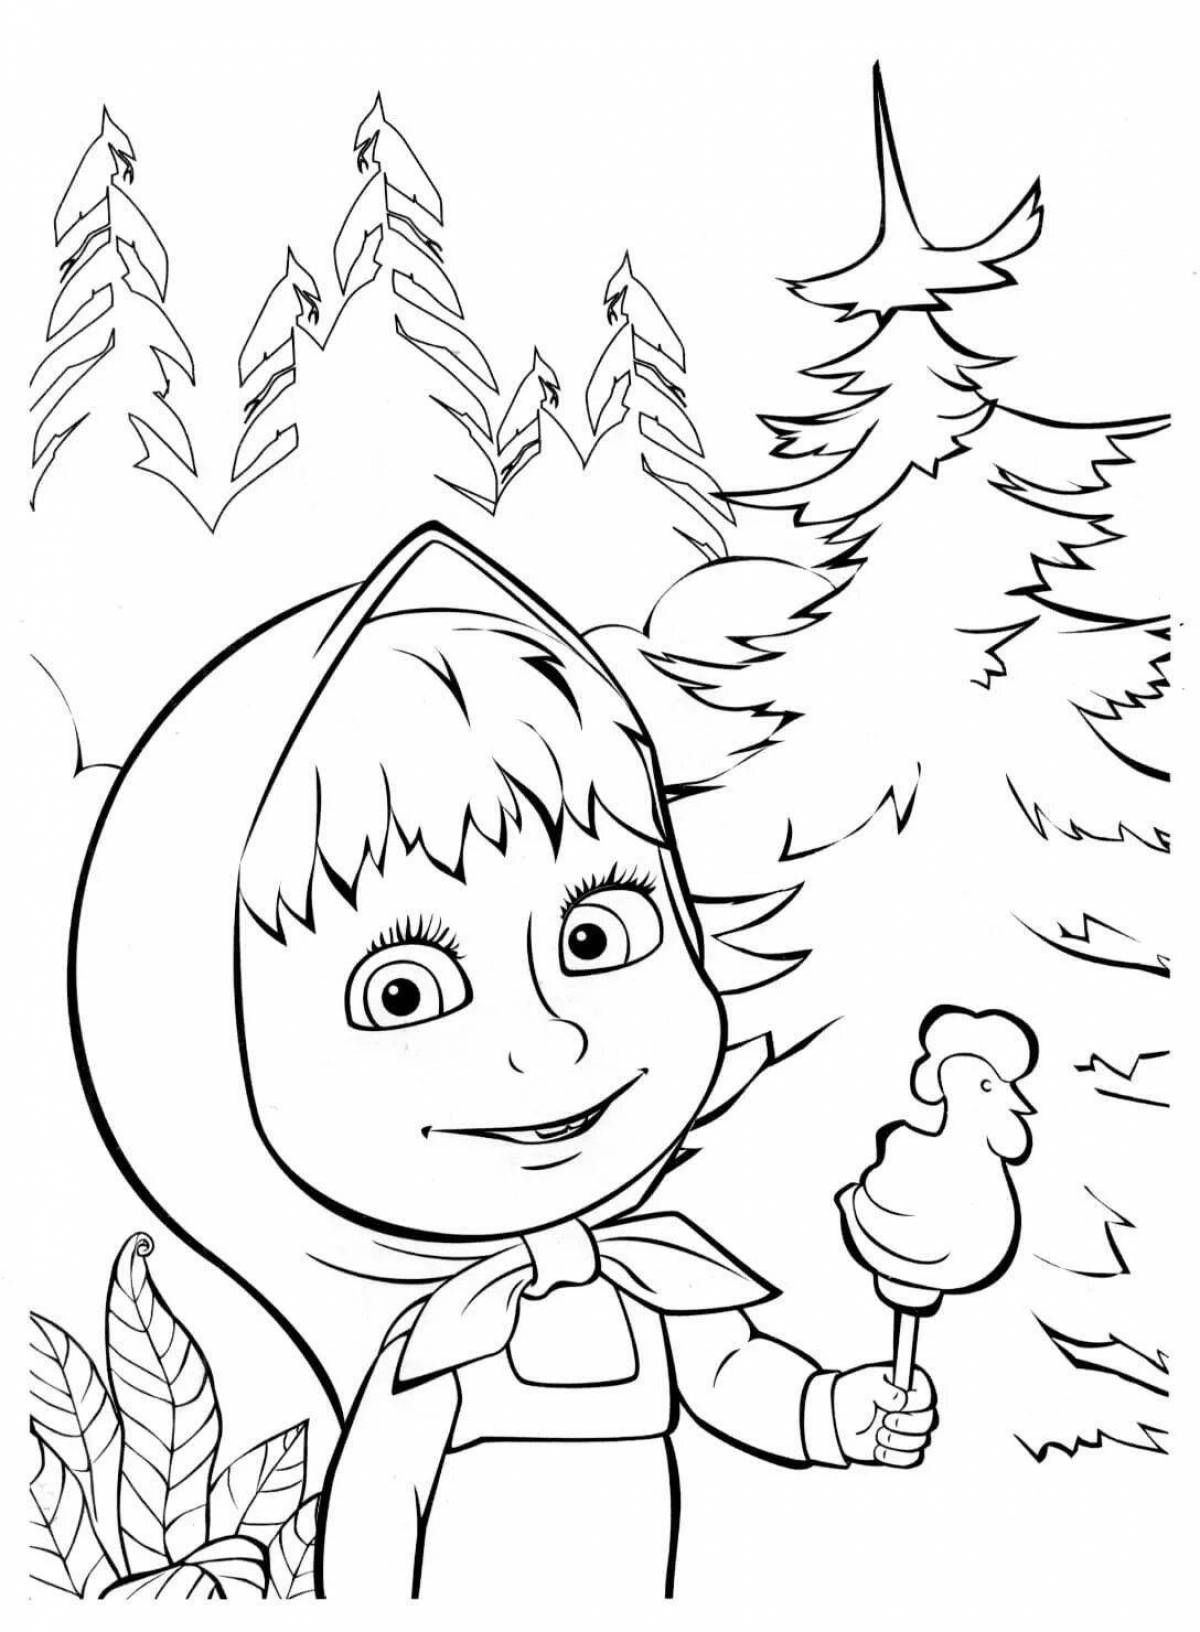 Colour-obsessed Masha and the Bear coloring book